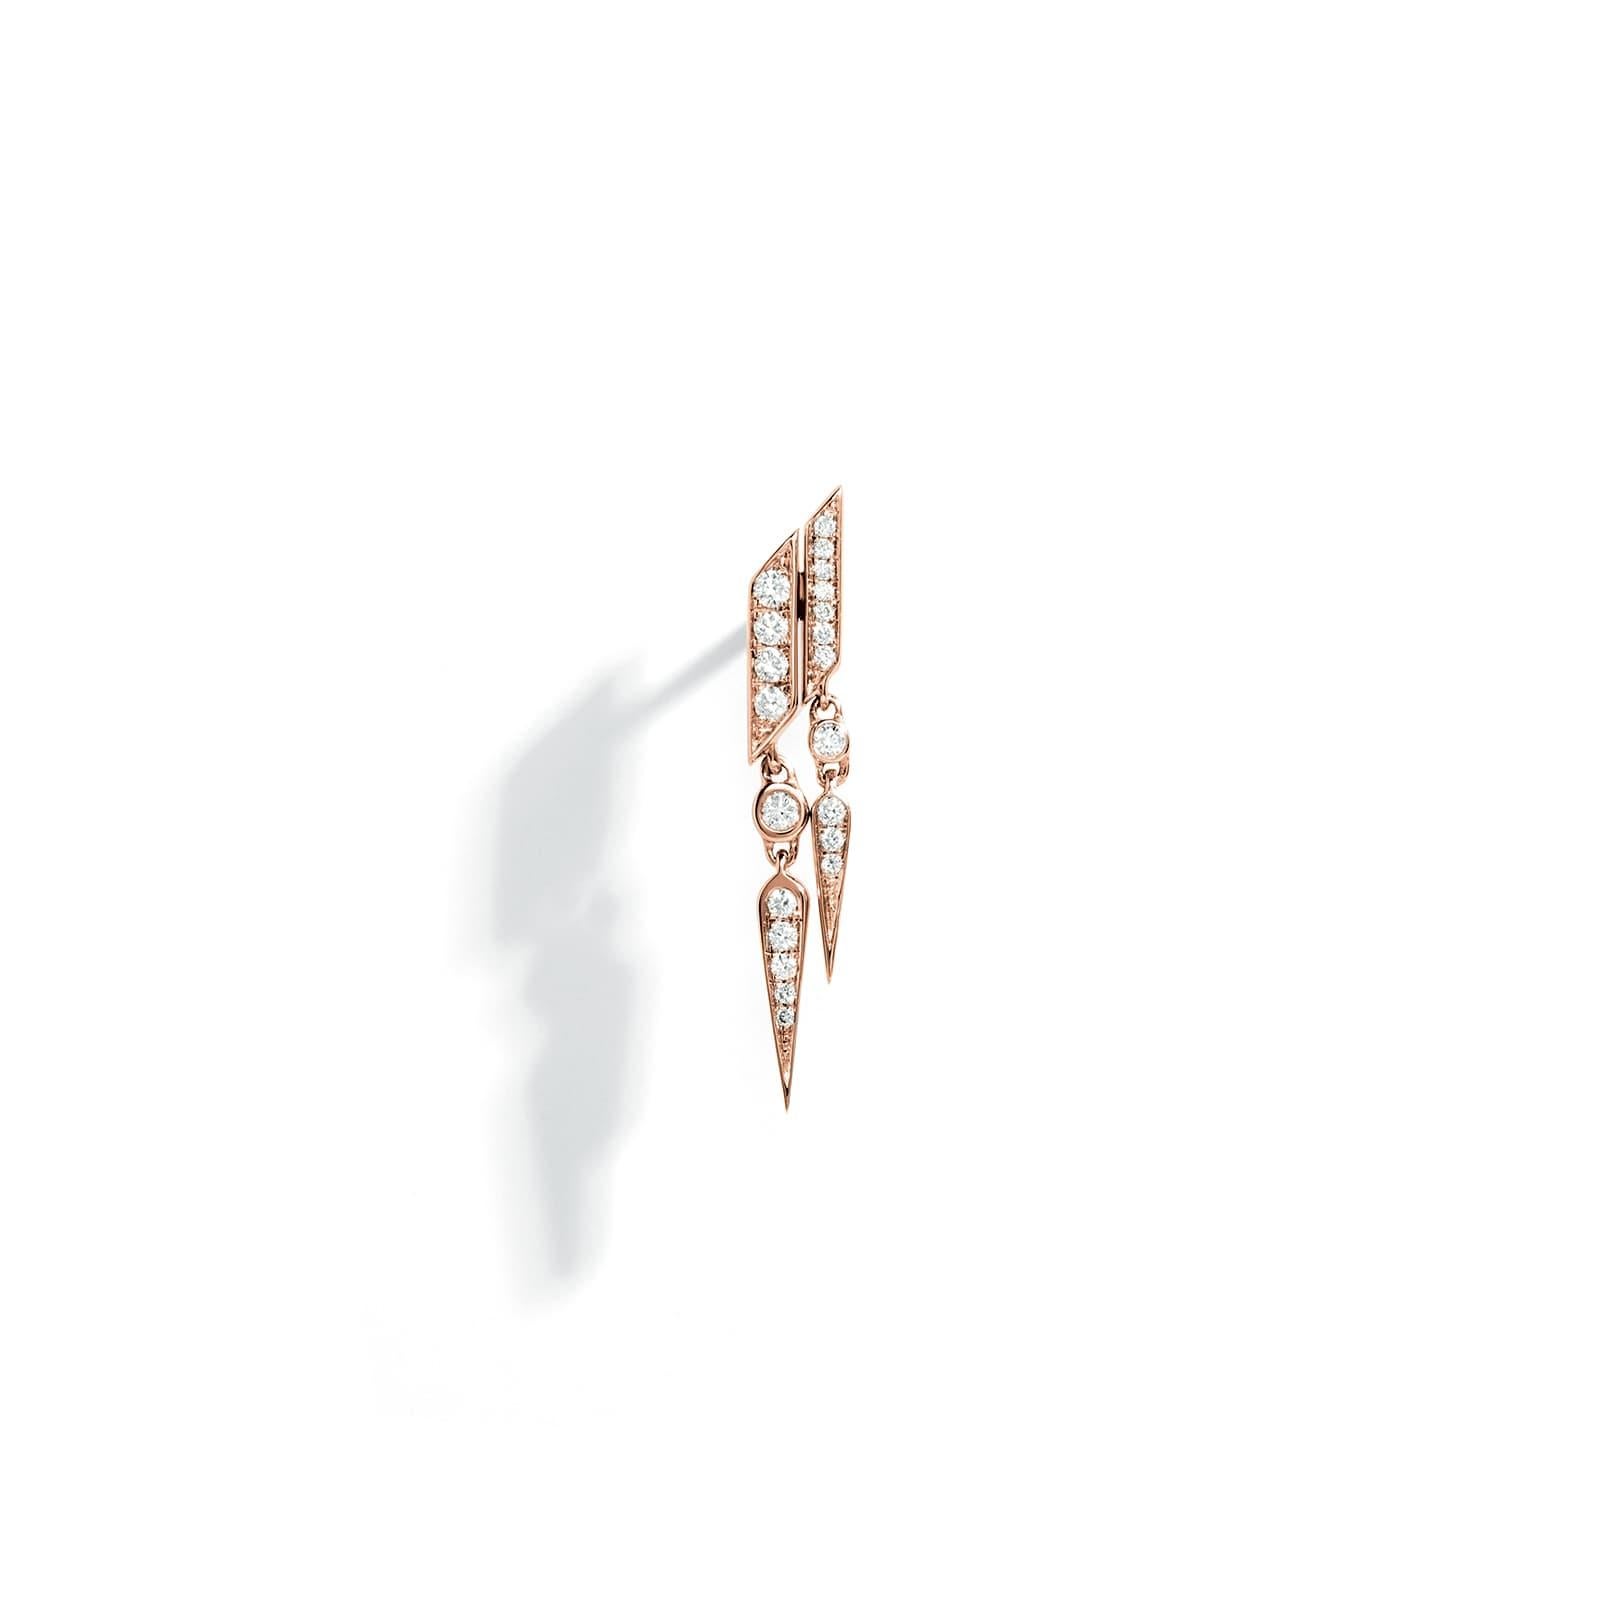 Earring Anyway double drops in rhodium plated sterling silver, set with 21 brilliant-cut diamonds quality G-VS, totaling 0,18 carat. 

The 